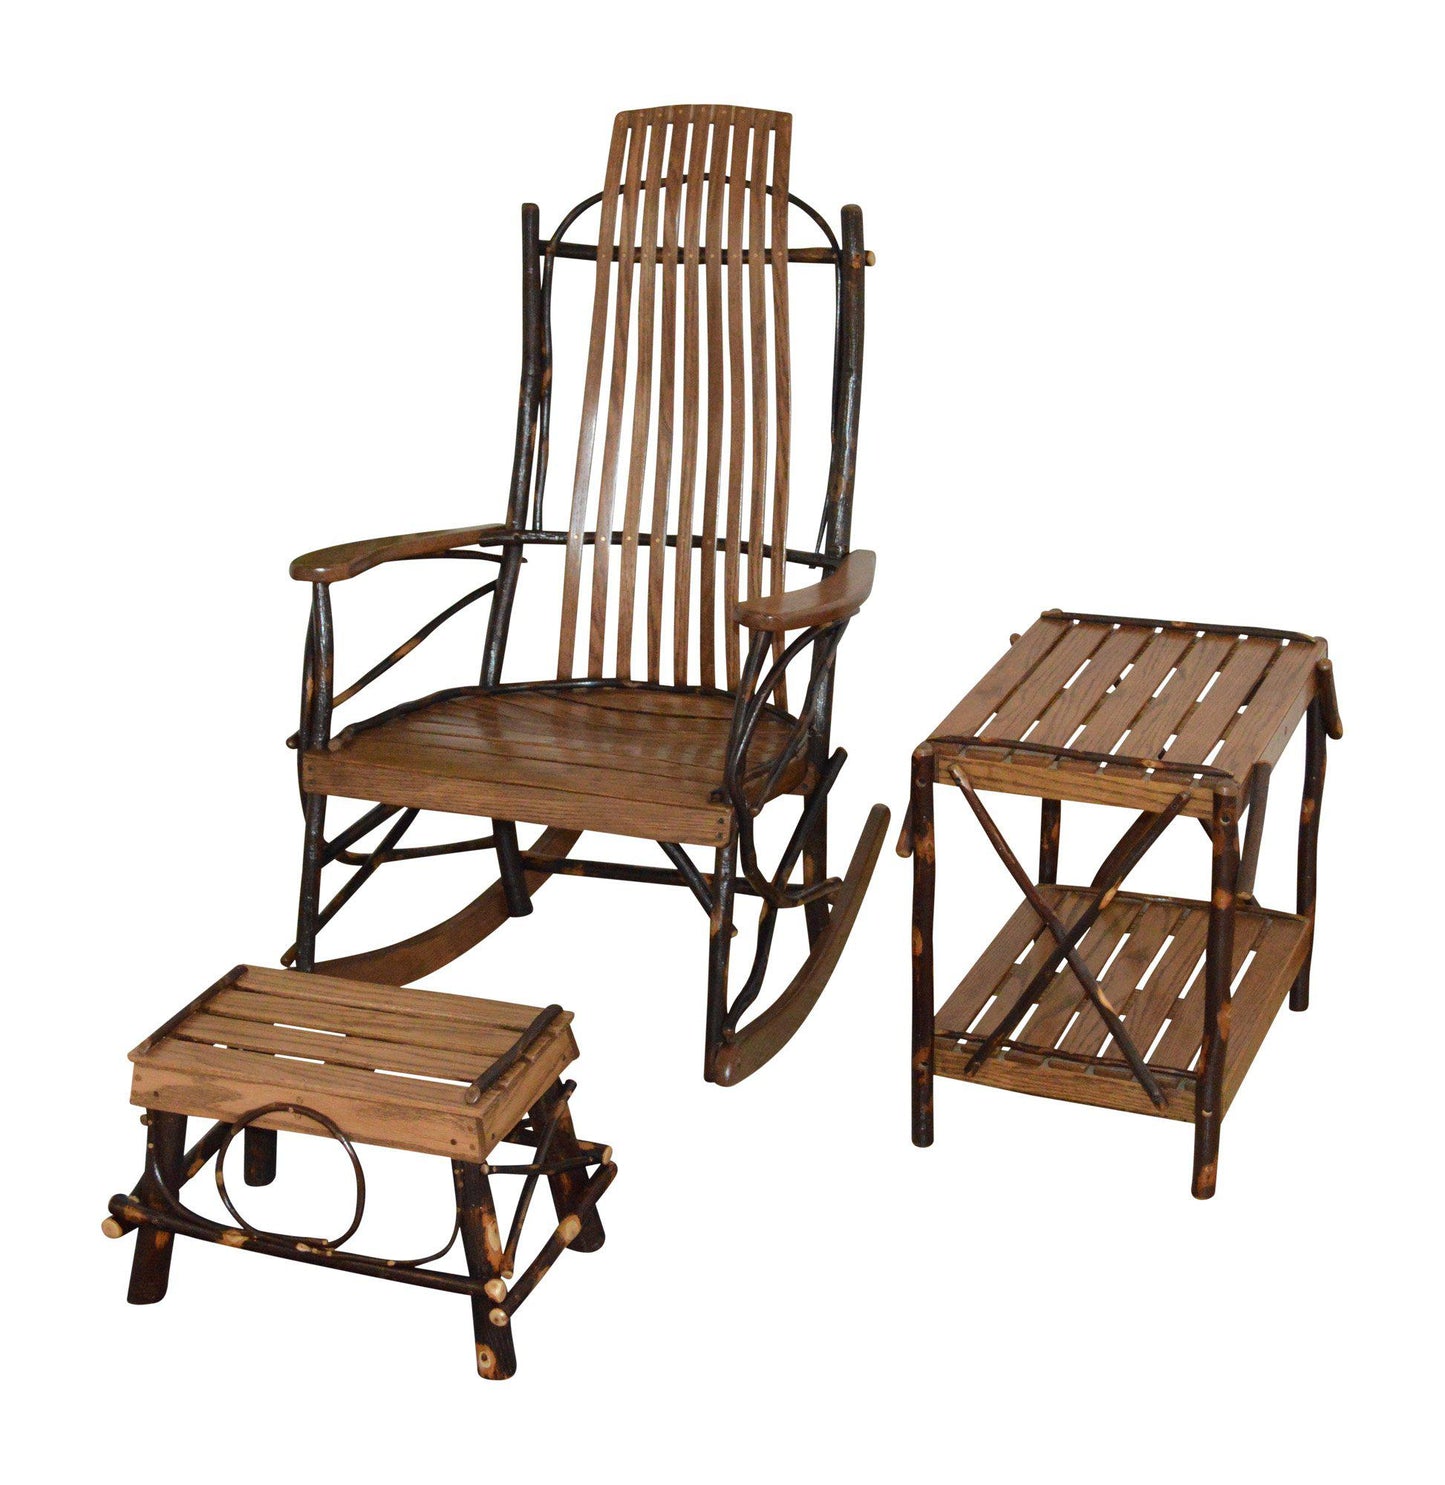 A&L Furniture Co. Amish Bentwood Hickory 9-Slat Rocker Chair w Foot Stool / End Table Set - LEAD TIME TO SHIP 4 WEEKS OR LESS